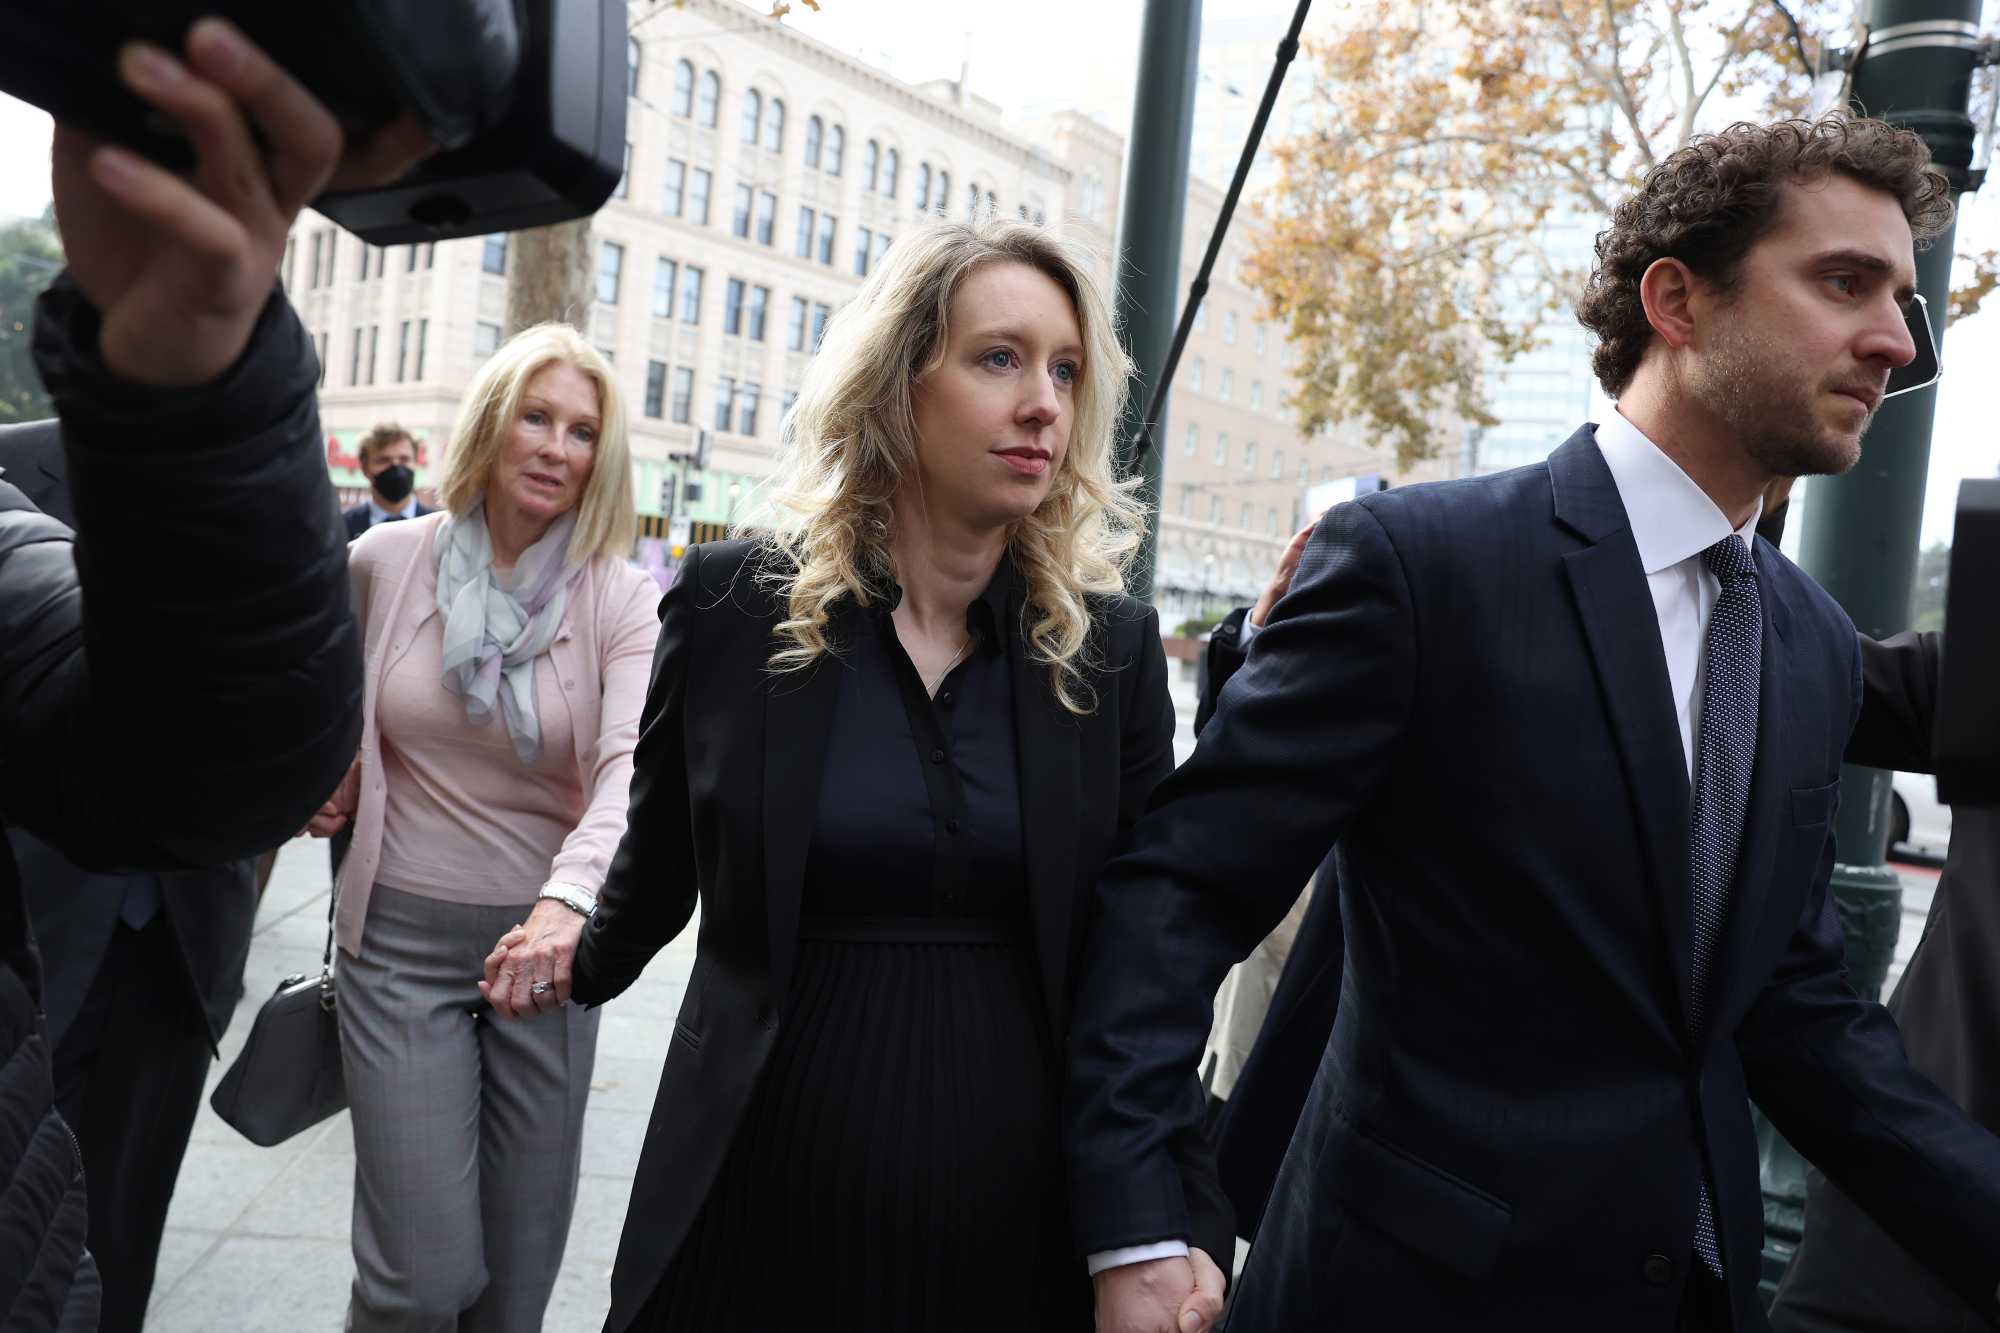 Elizabeth Holmes arrives at court for sentencing due to Theranos fraud